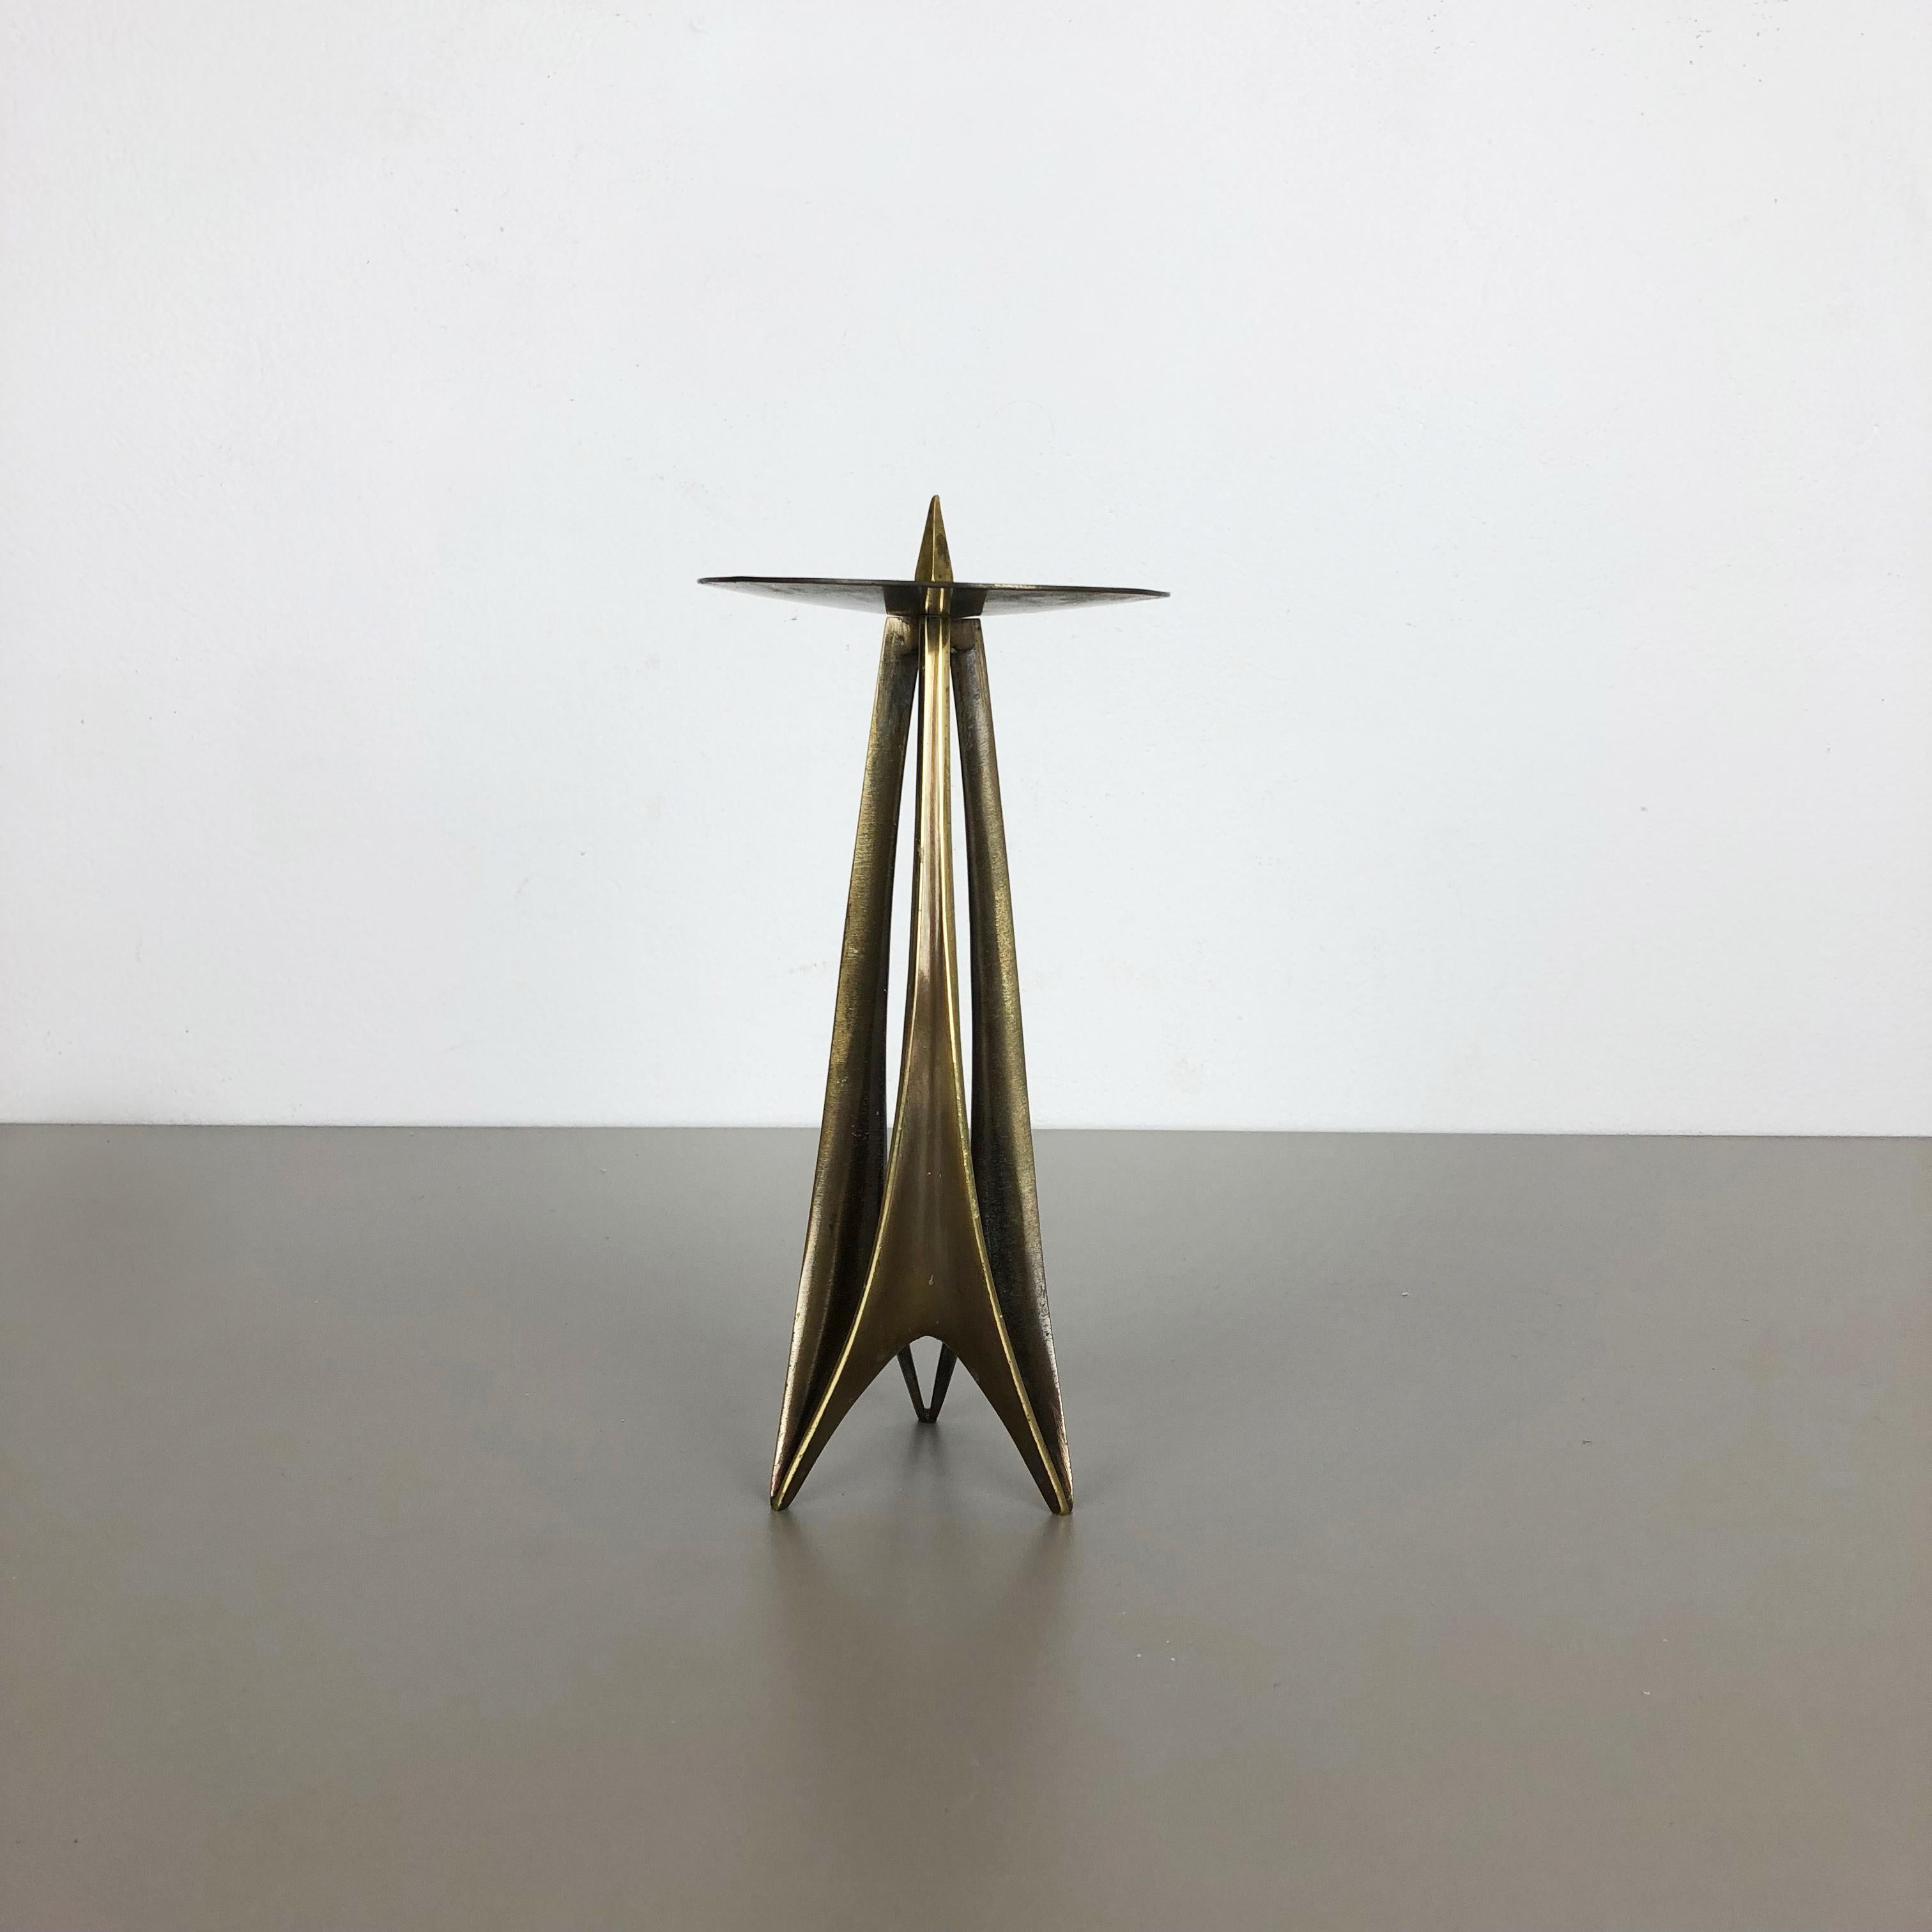 Candleholder 

designed by Klaus Ullrich, 1958 

producer Faber & Schumacher, Germany,

1950s.

Brass candleholder designed by Klaus Ullrich in 1958 for Faber & Schumacher, Germany. It is made from solid metal in black and brass tones. It